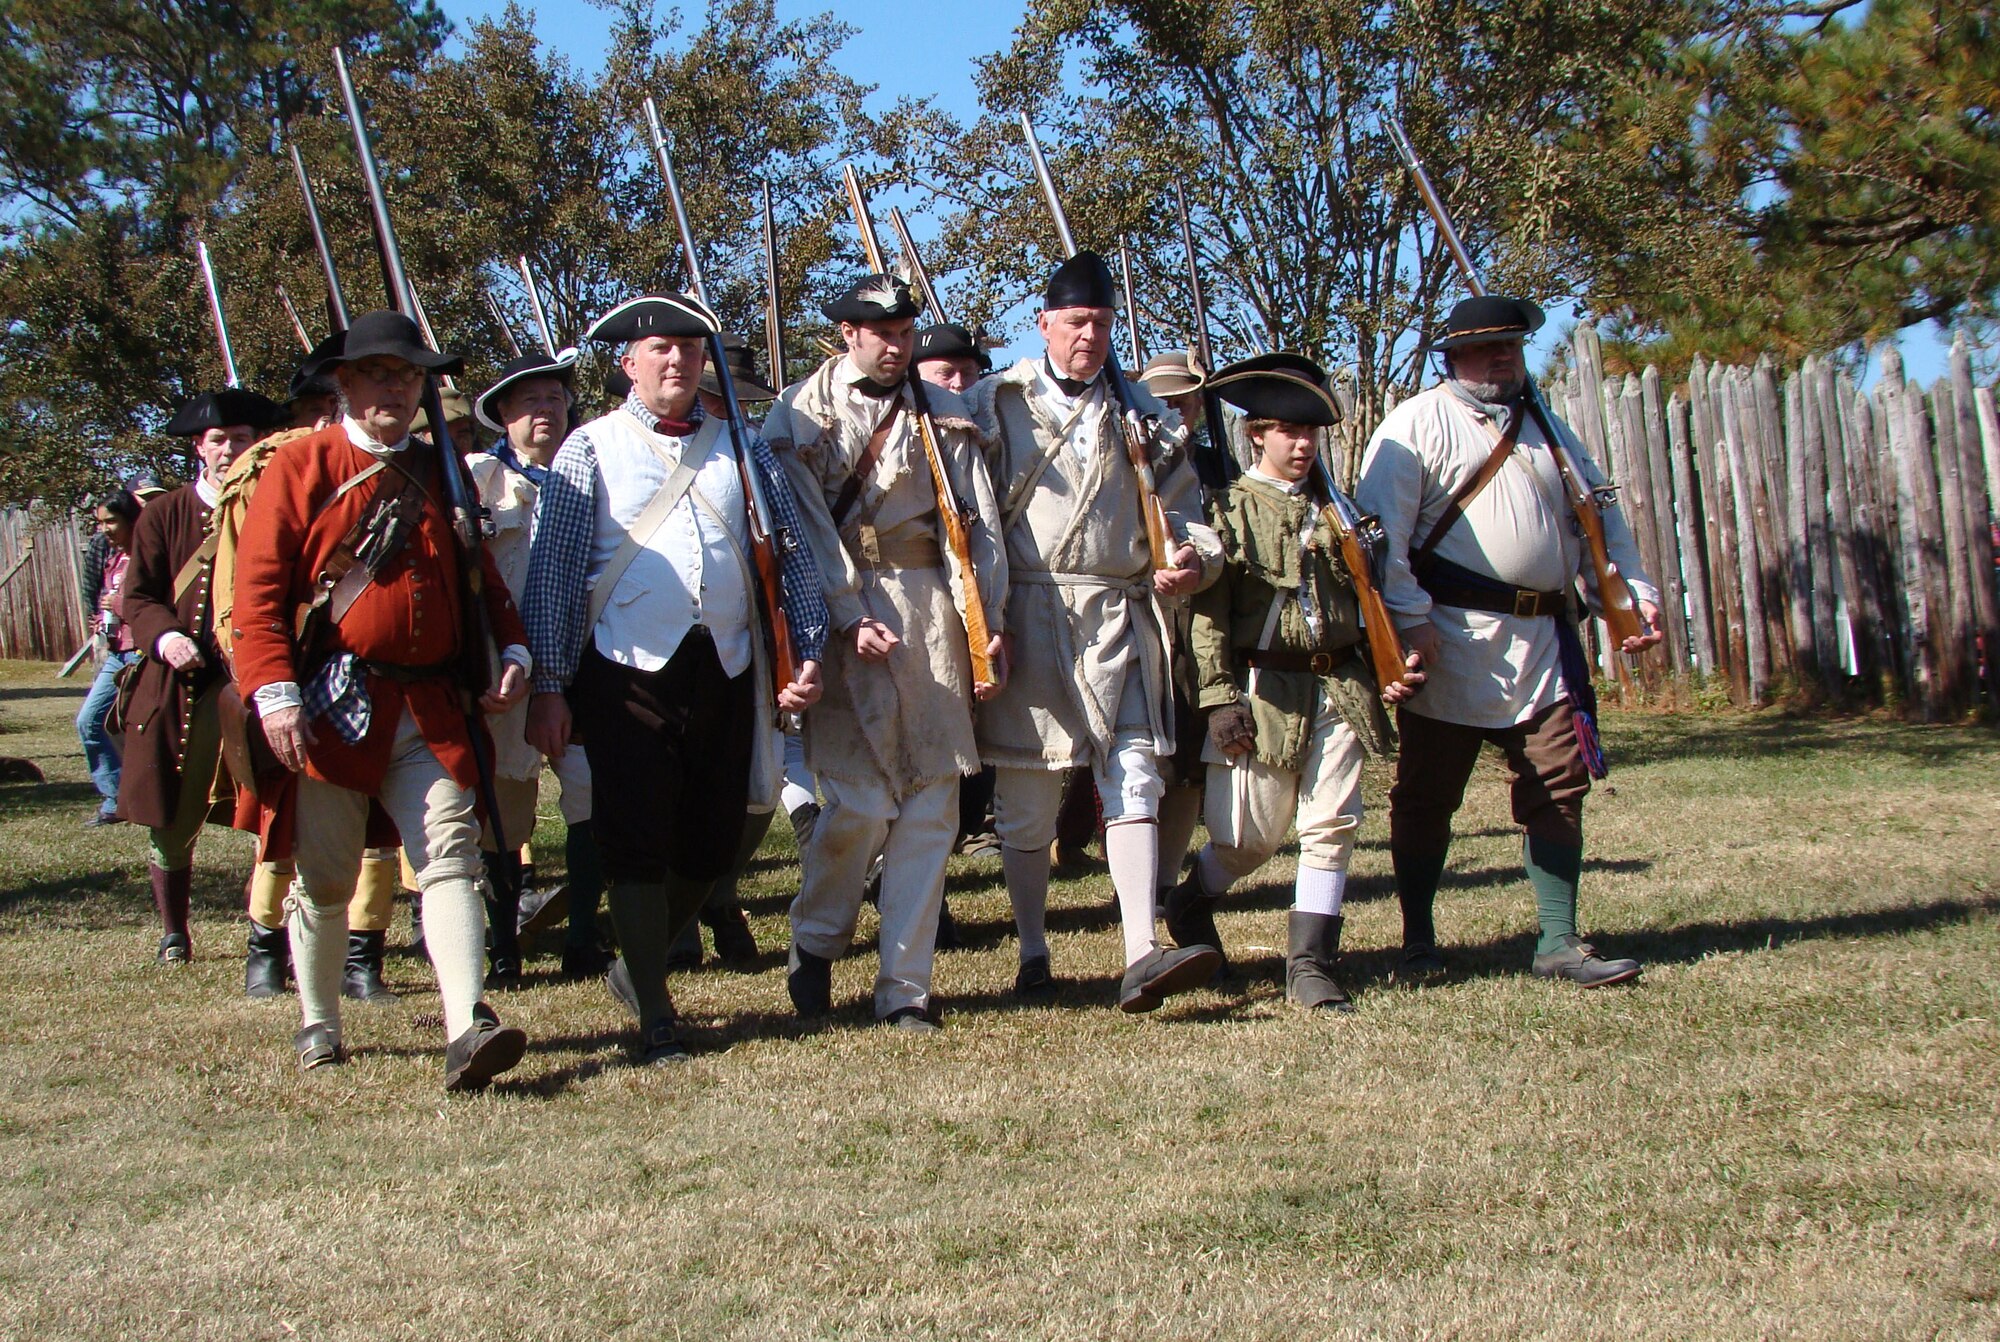 Marching toward the battle, re-enactors portray colonial militiamen of the American War of Independence, about 25 miles north of Shaw Air Force Base, at Camden, S.C., Nov. 3, 2012. Camden was the site of the Continental Army’s worst defeat on Aug. 16, 1780. More than 200 re-enactors, including many military veterans, brought the battlefield back to life 232 years after the event. (U.S. Air Force photo by Rob Sexton/Released)